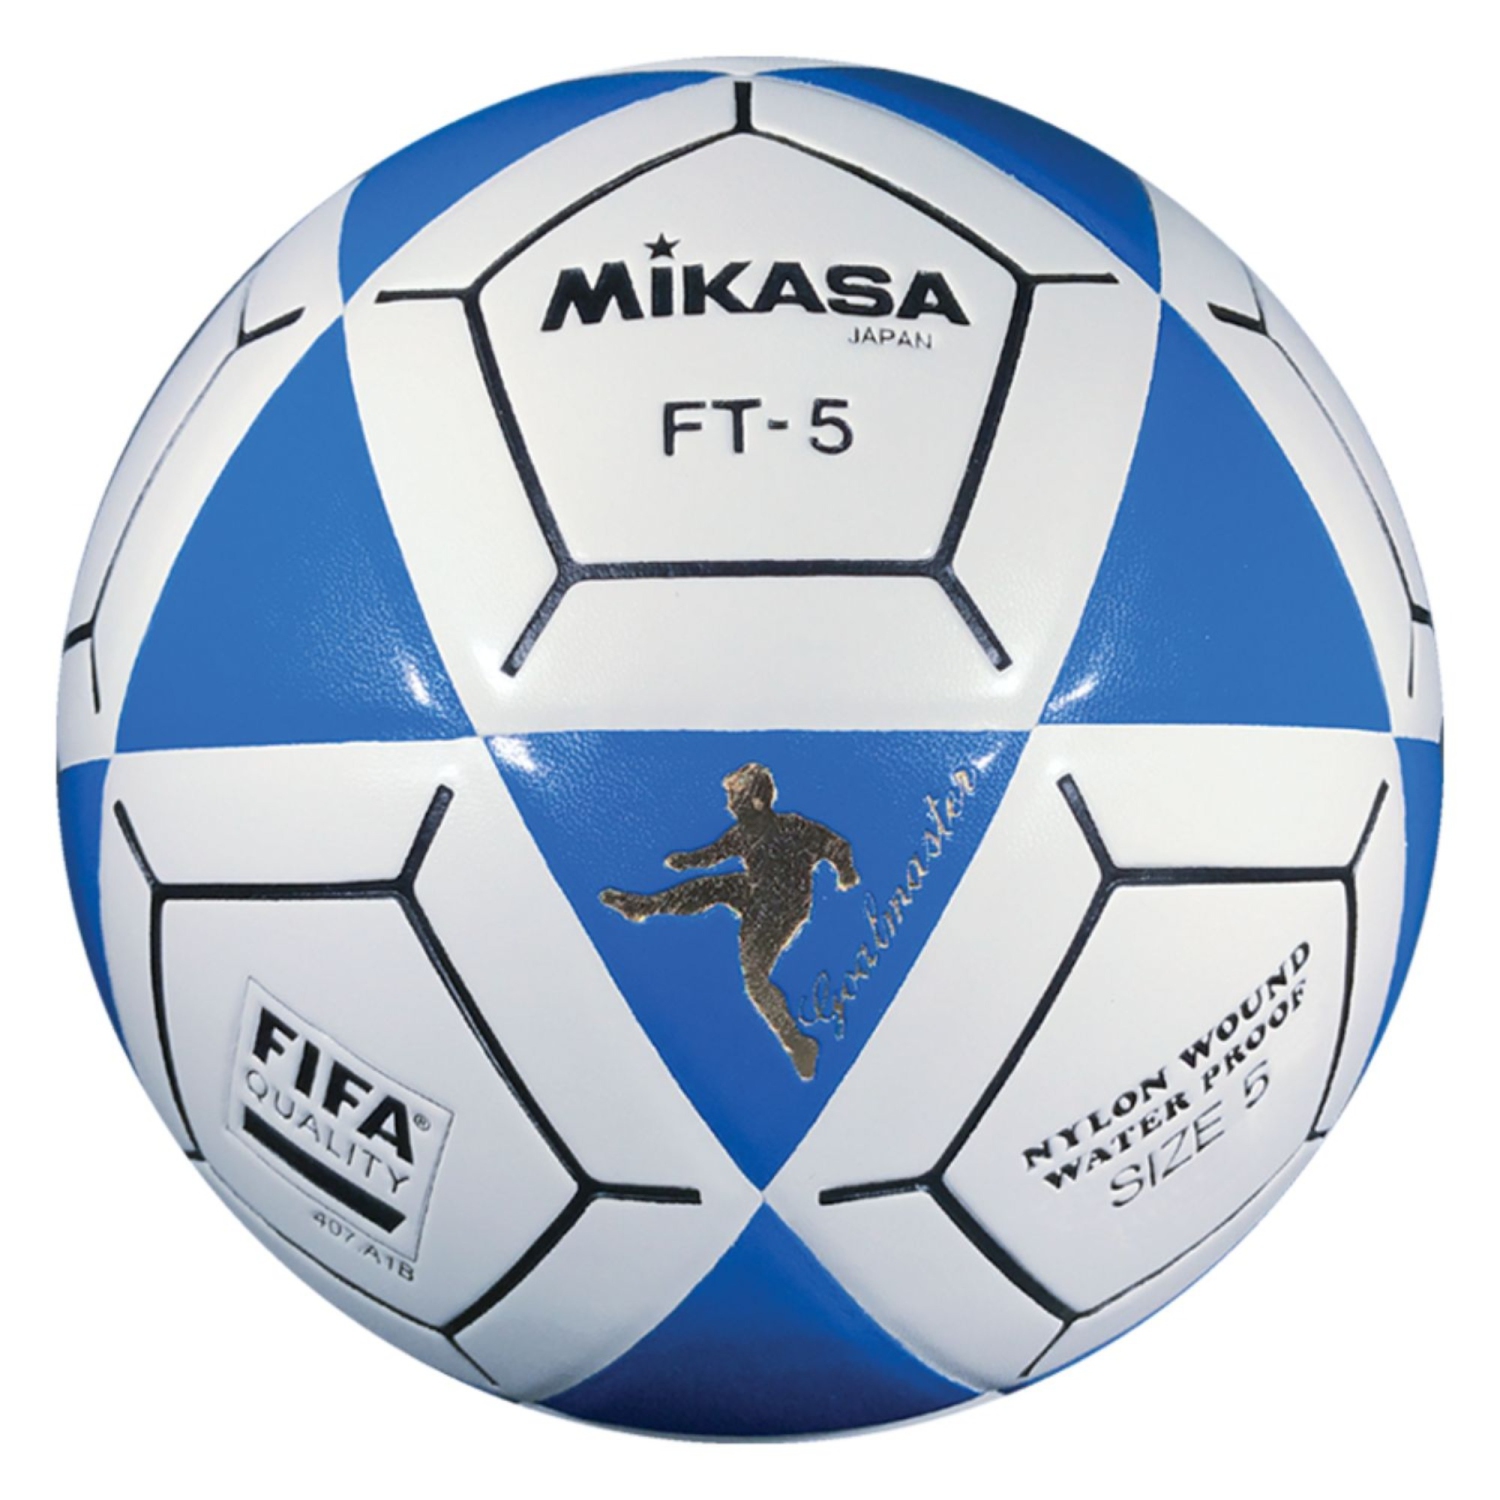 Mikasa Goal Master Soccer Ball - FT-5 Official FIFA and NFA Footvolley Size 5, Blue/White